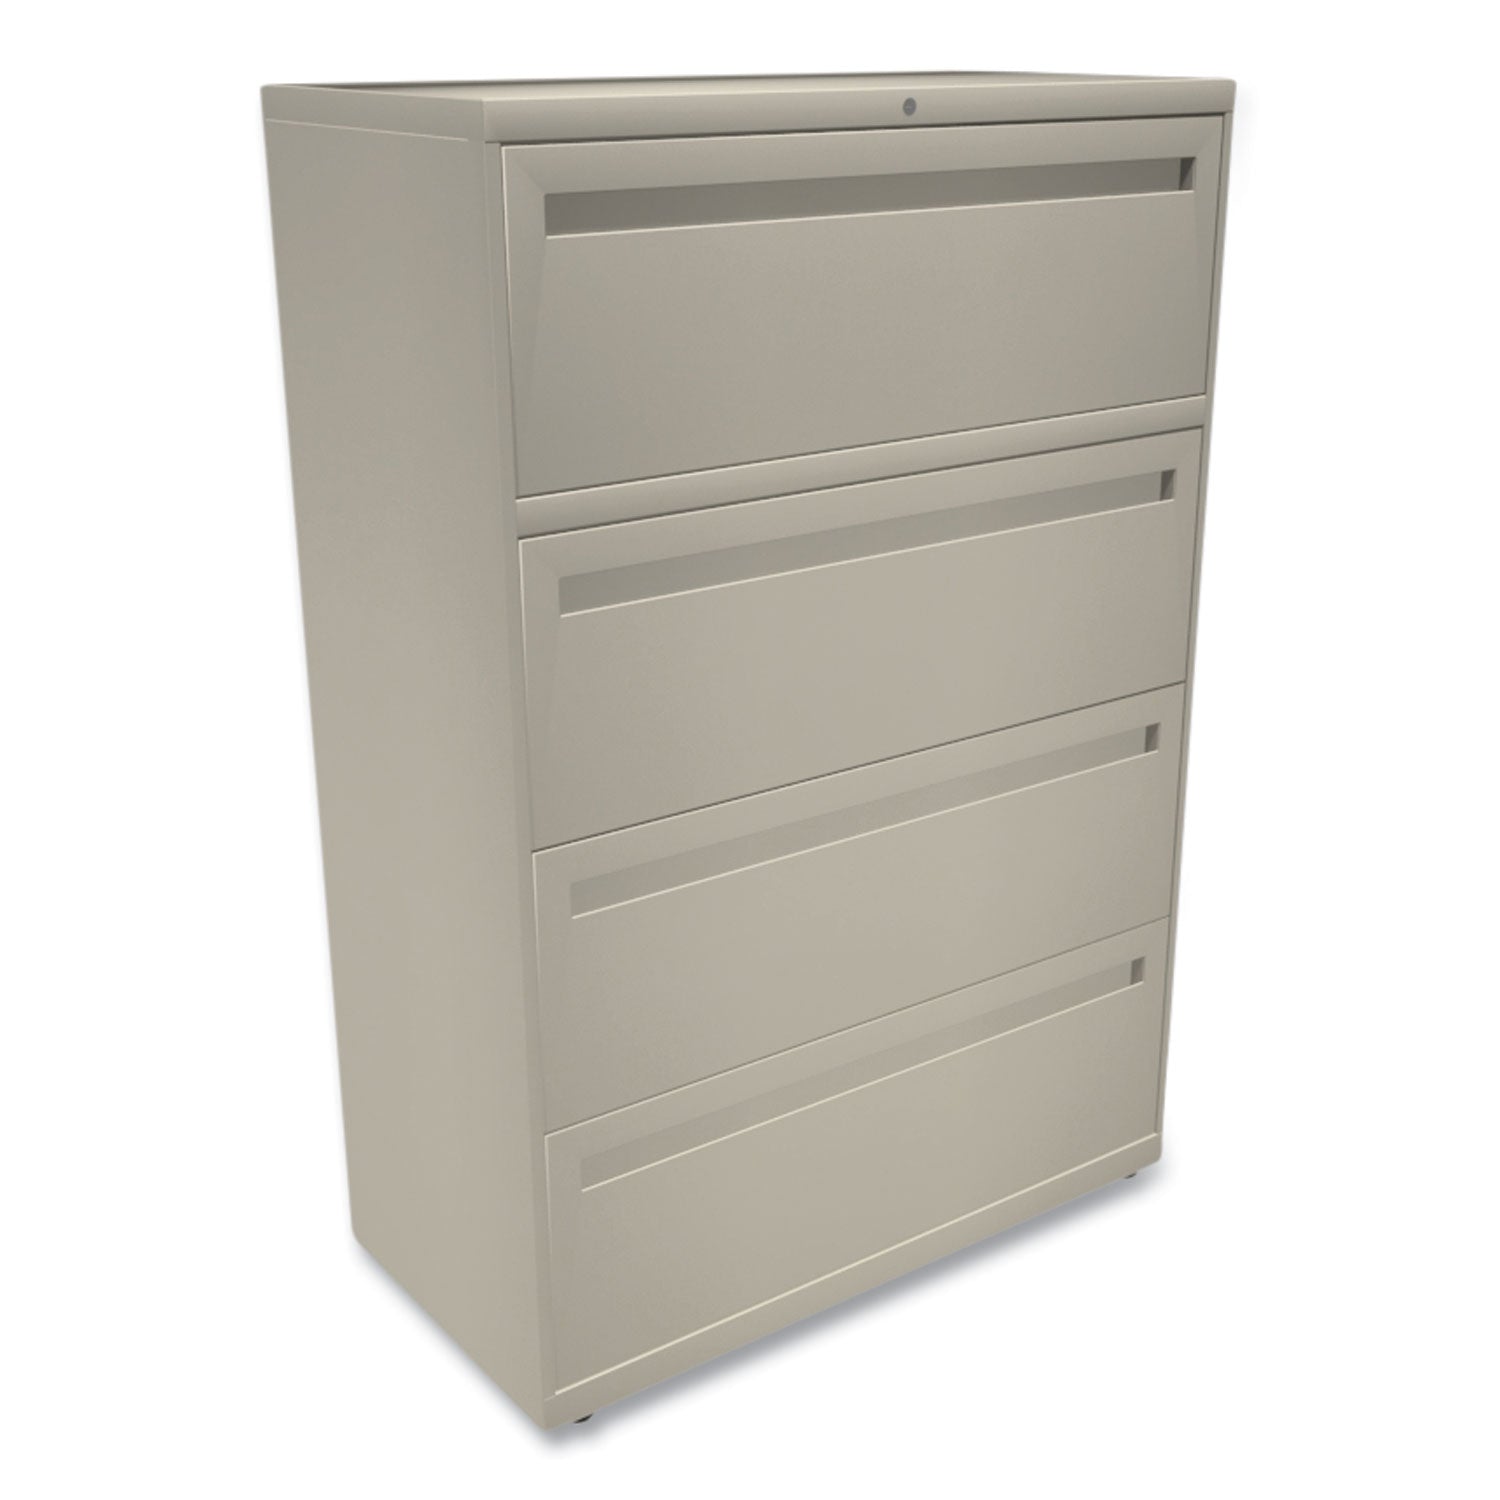 Brigade 700 Series Lateral File, 4 Legal/Letter-Size File Drawers, Putty, 36" x 18" x 52.5 - 